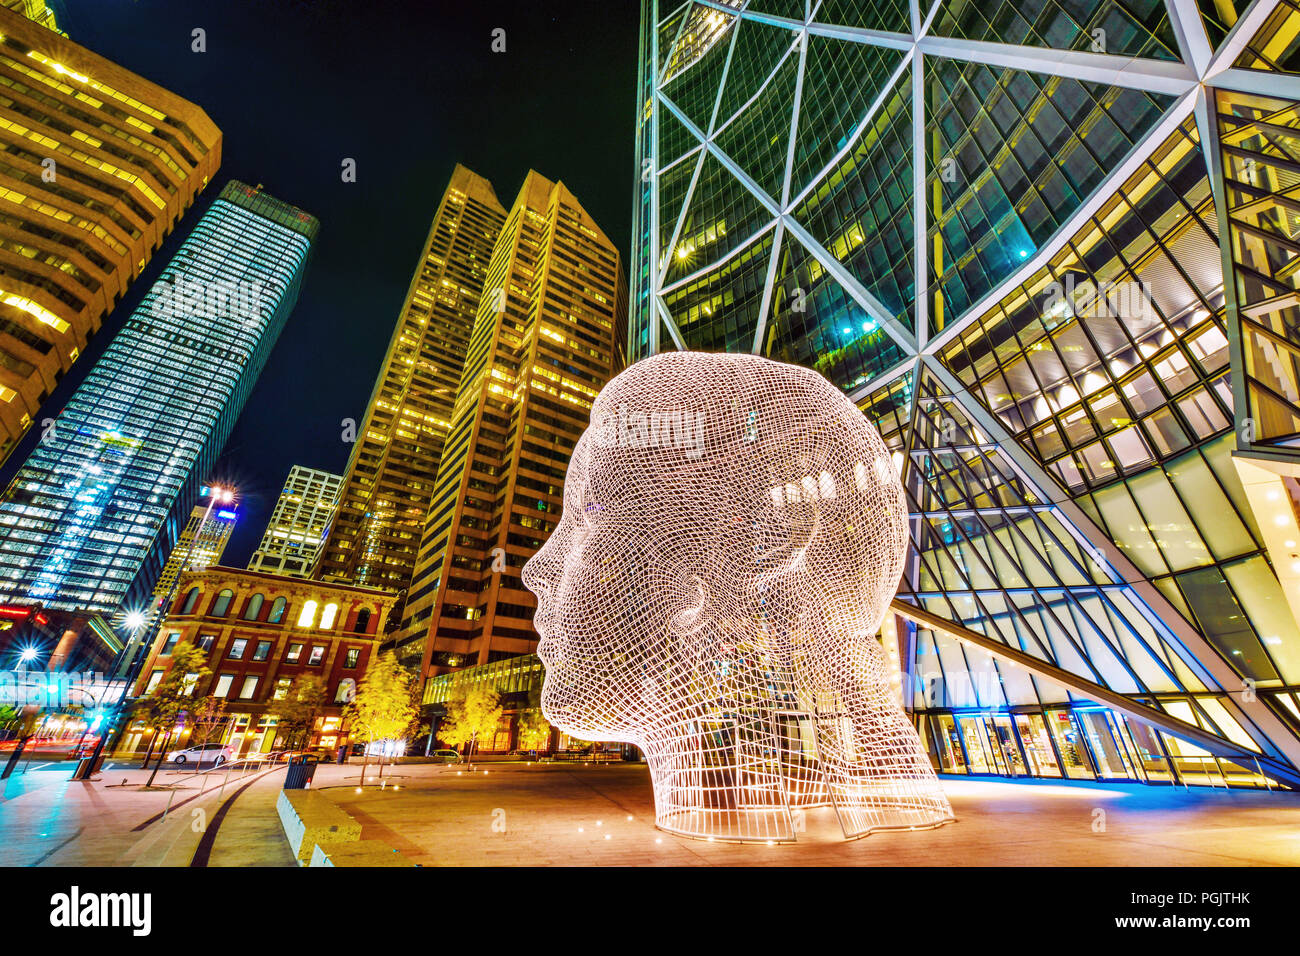 Night view of the popular 'Wonderland' sculpture by famous artist Jaume Plensa sits in-front of The Bow tower in Calgary, Alberta,Canada Stock Photo